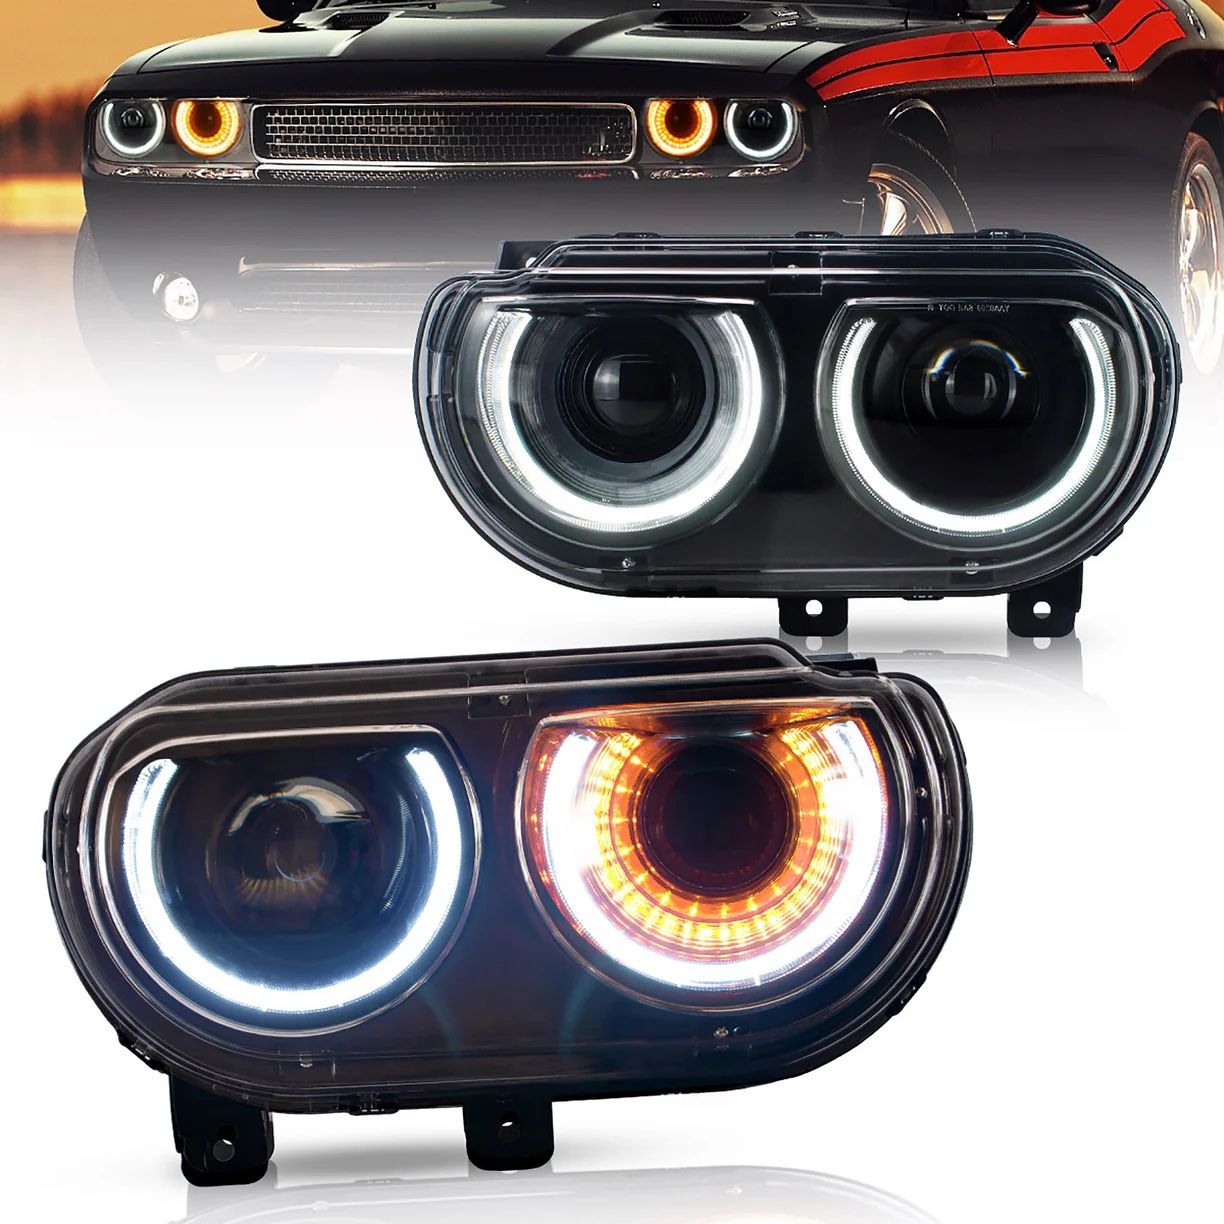 New LED Headlights For Dodge Challenger 2008-2014 Front lights Assembly